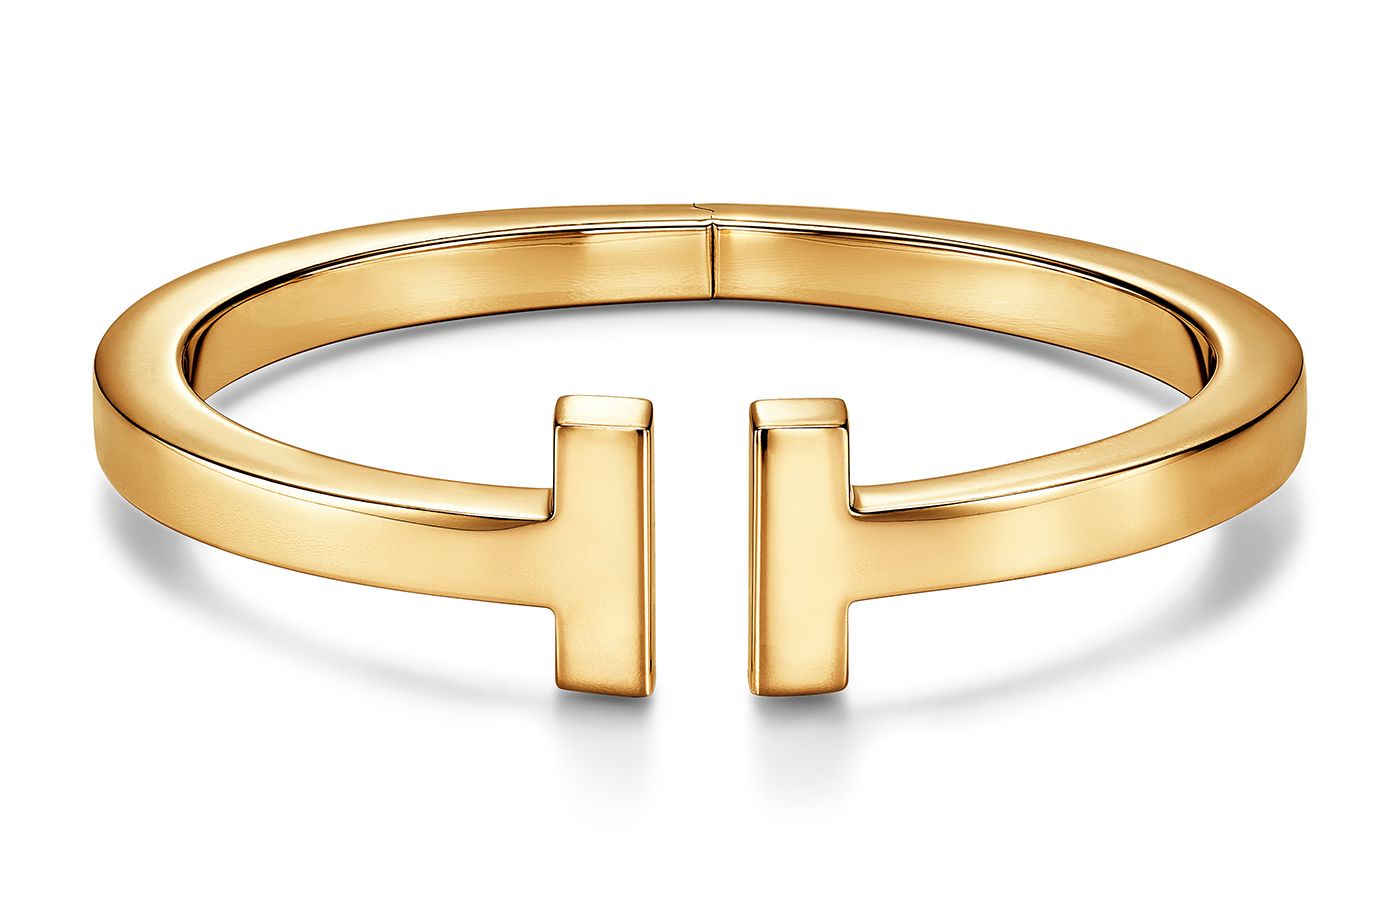 The Top 5 Greatest Designers in Tiffany & Co. History